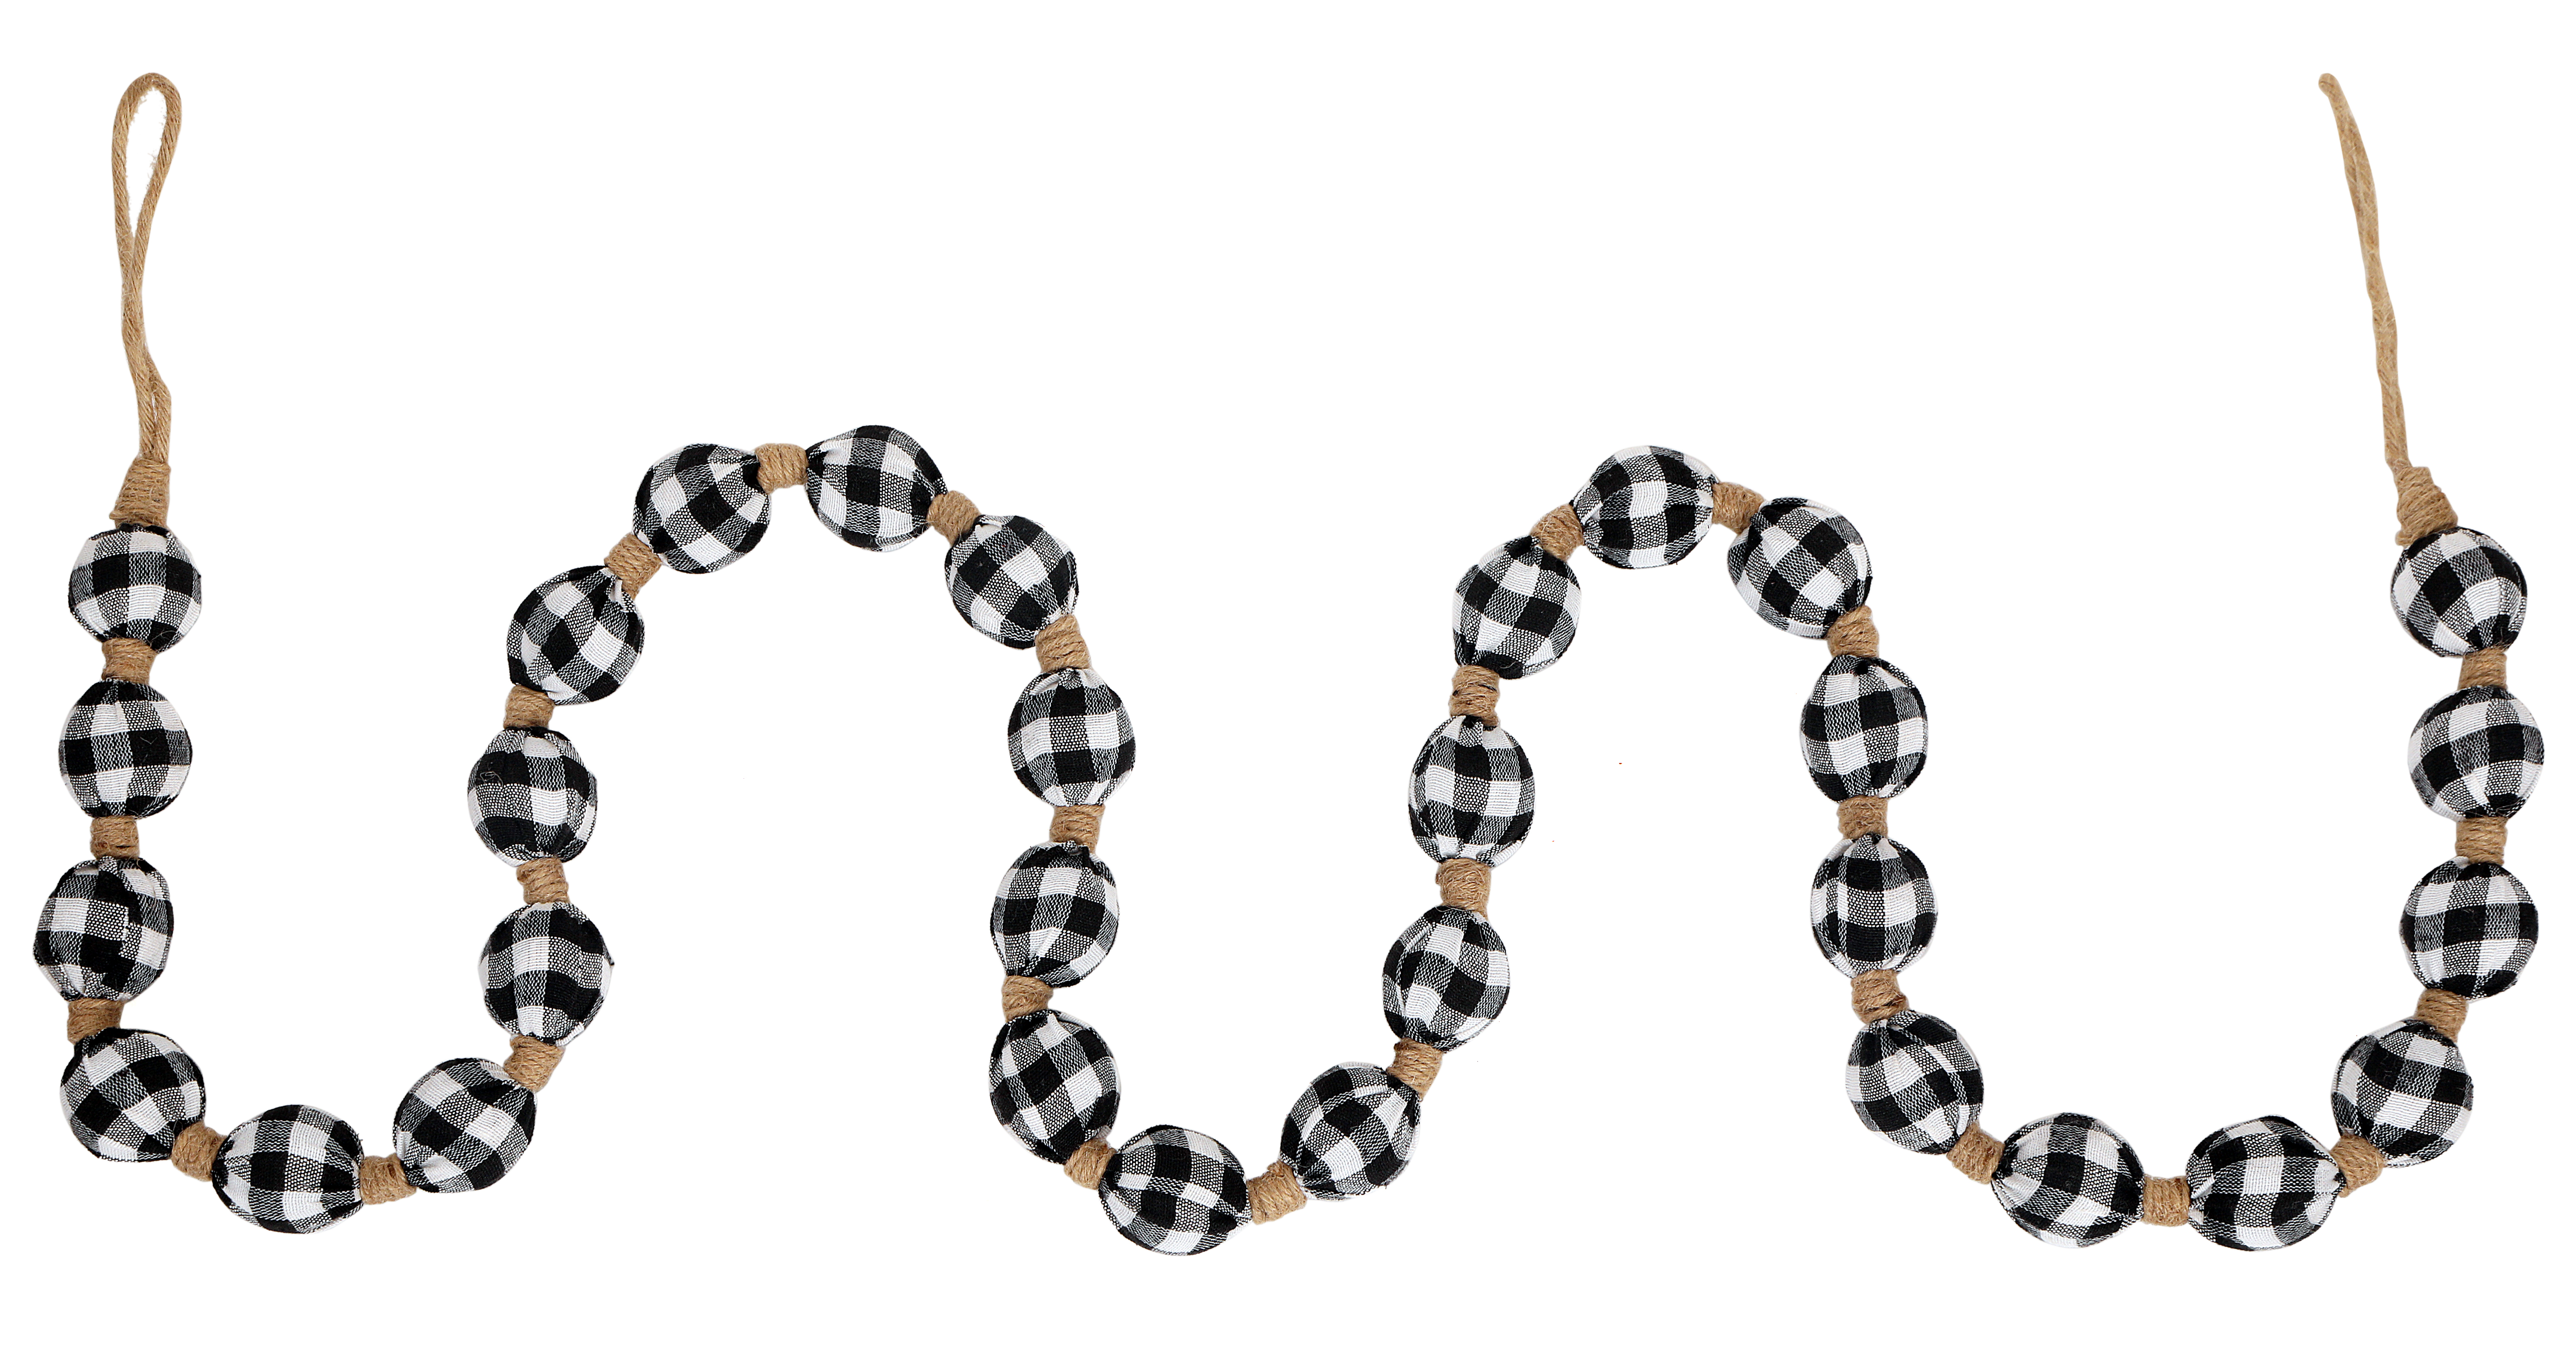 Holiday Time DC S2 - 6 feet Black/ White Fabric Garland (Set of 2 garlands 6 feet each) - image 2 of 6